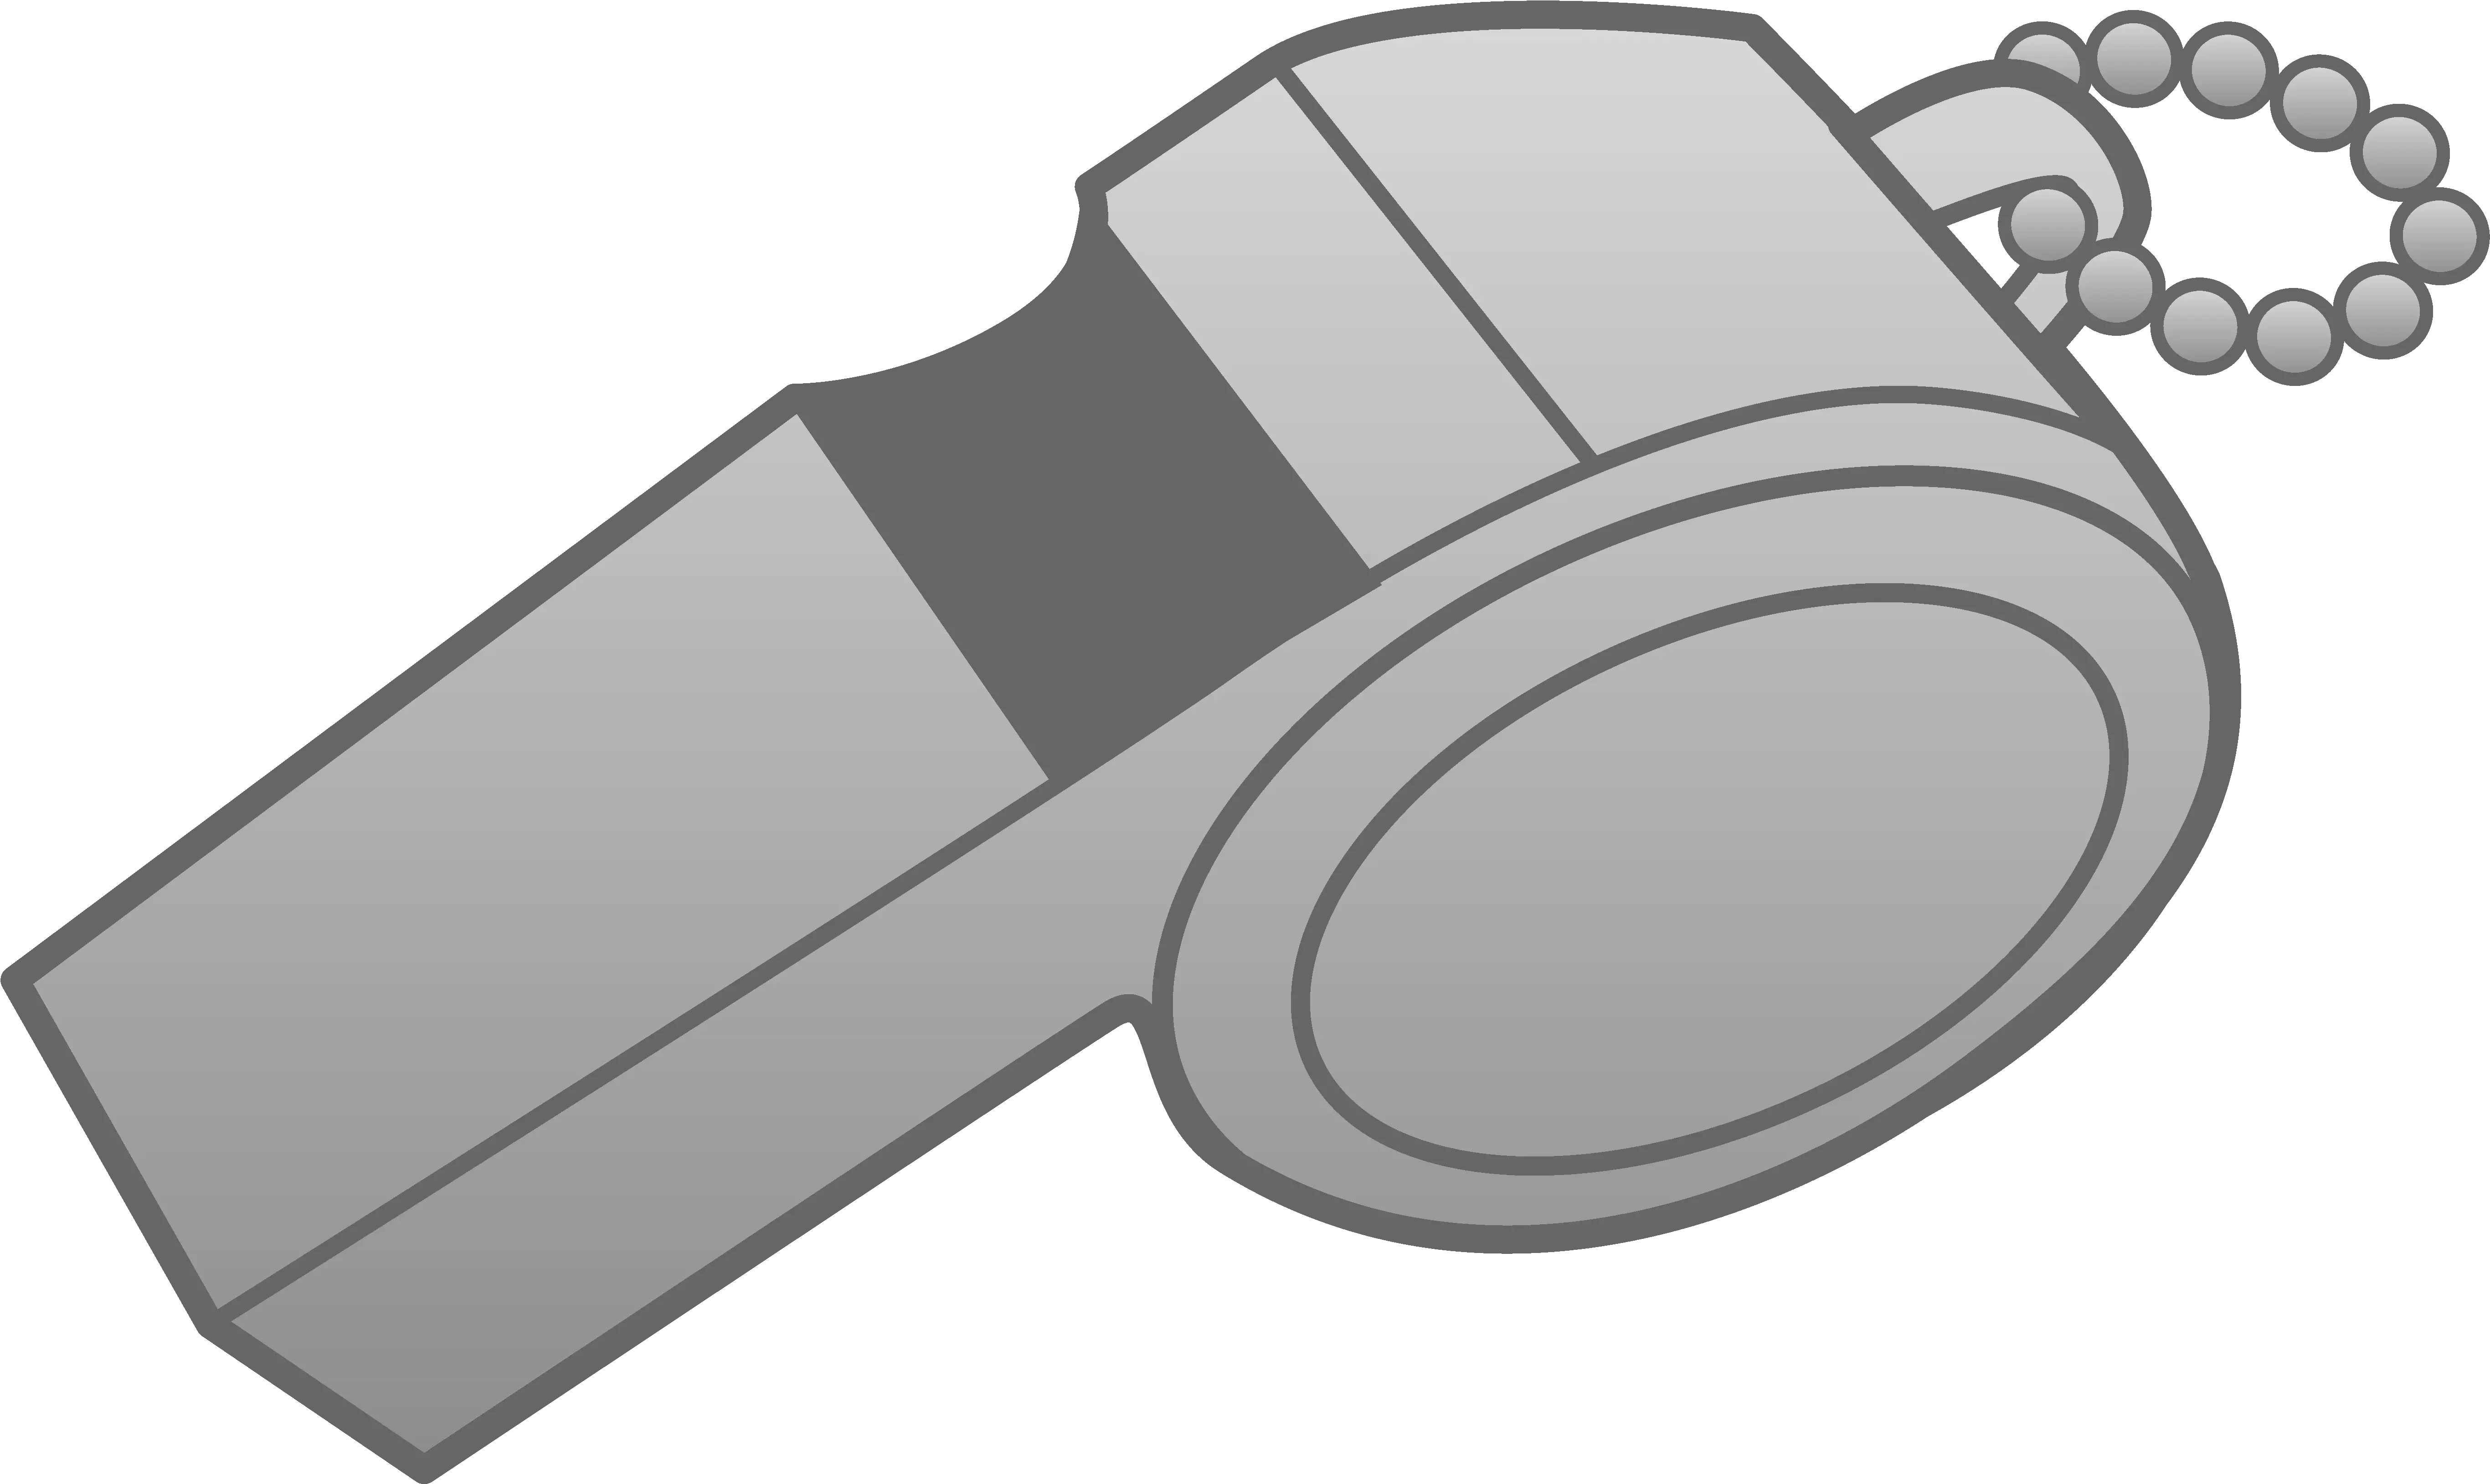 Party Whistle Png Picture 793779 Clipart Whistle Clip Art Whistle Png